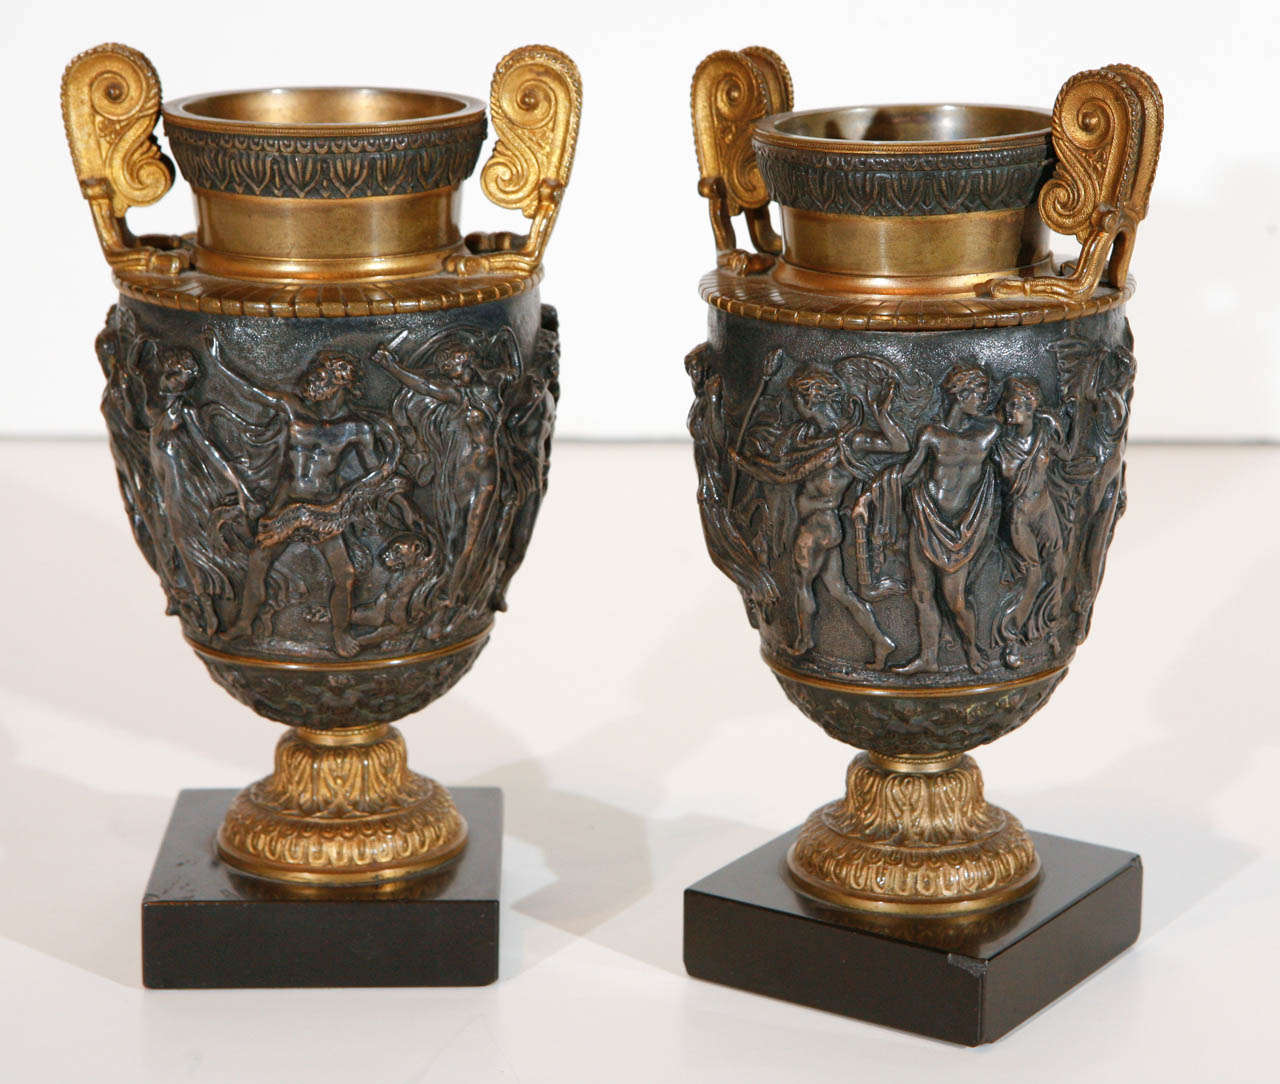 Pair of petite, hand-cast, silver and gilt bronze urns with neoclassical reliefs on granite bases.